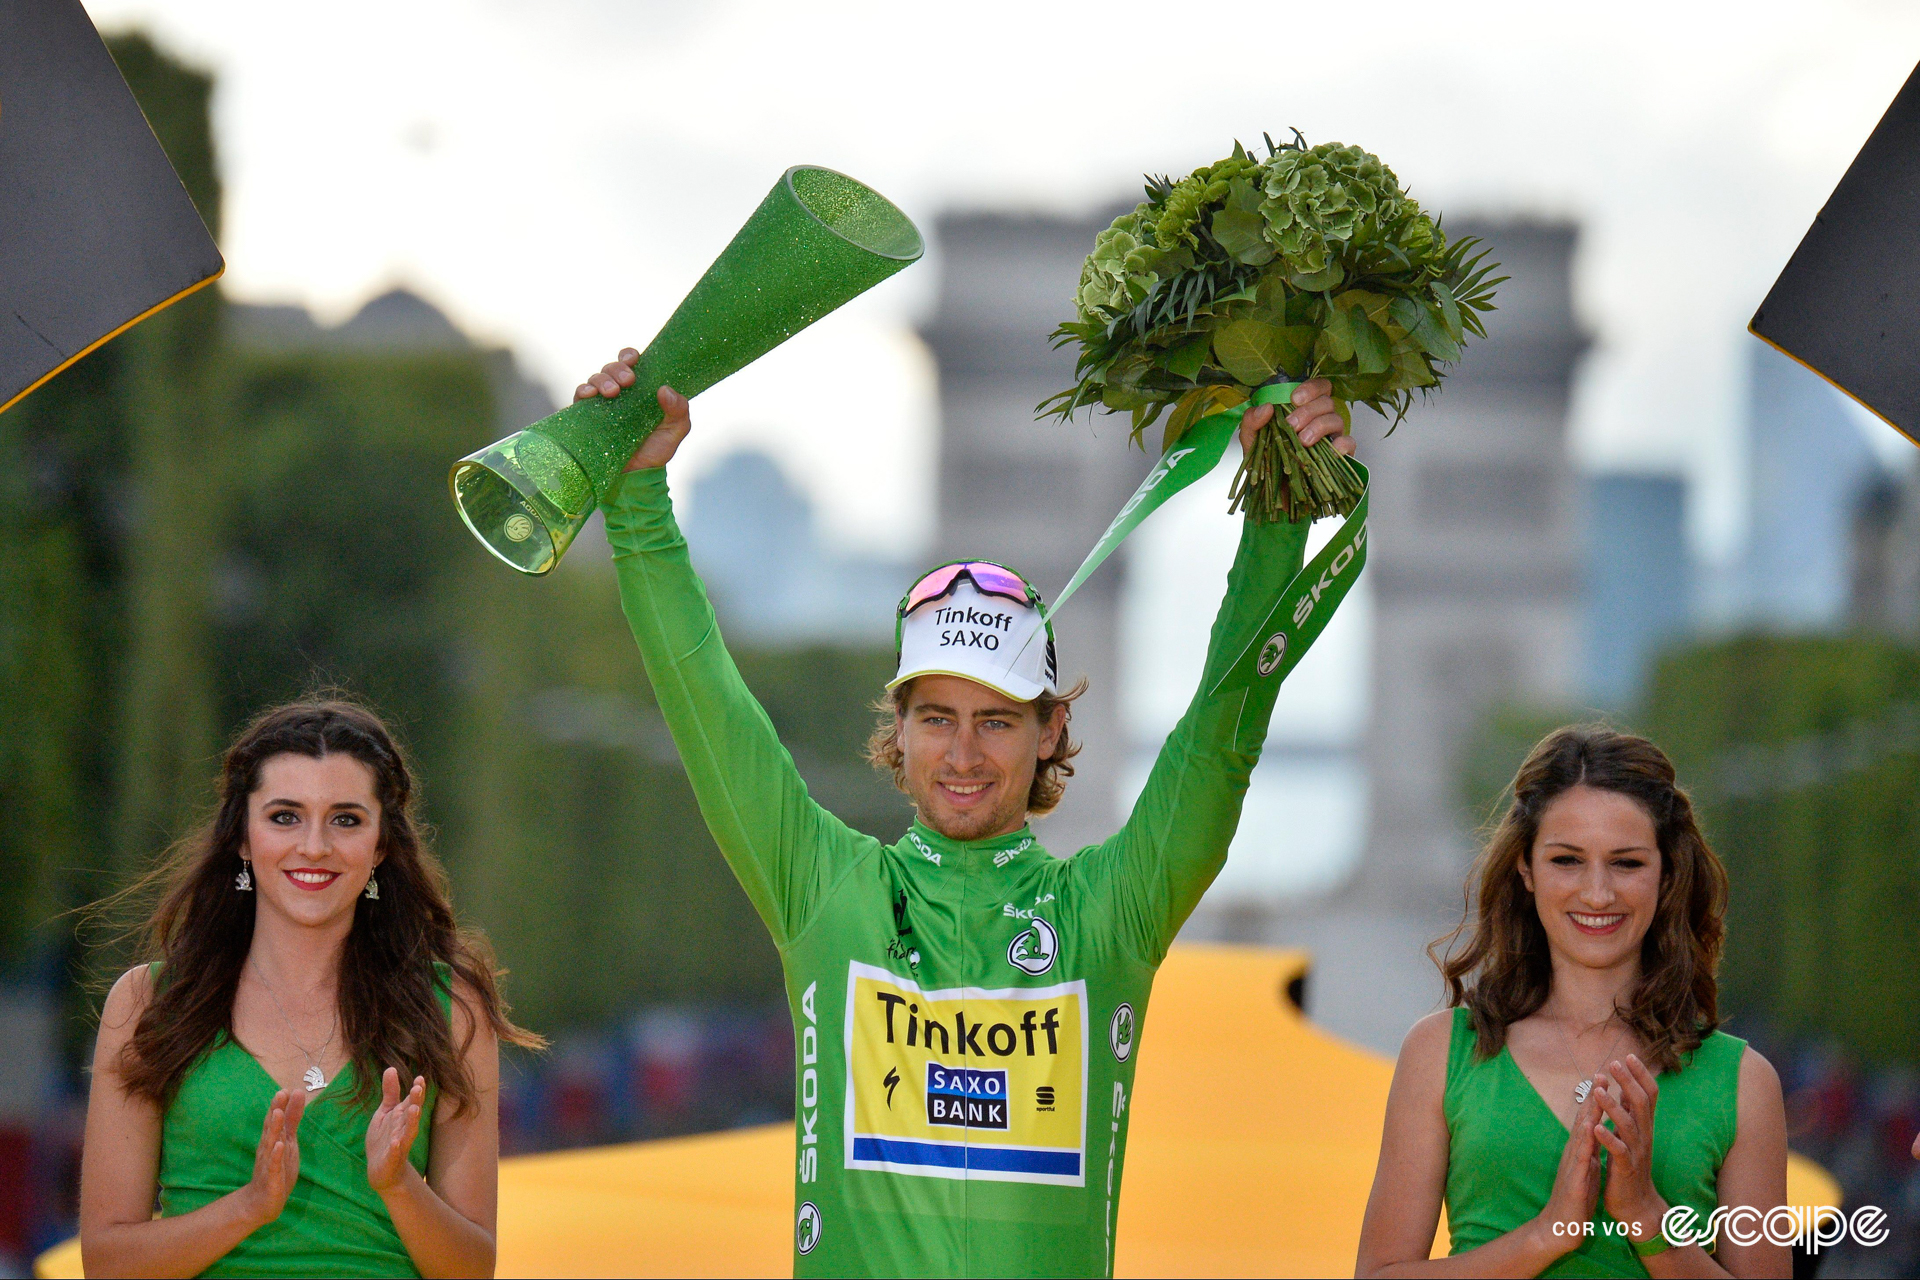 Peter Sagan on the final podium at the 2015 Tour de France wearing green, holding a bouquet of flowers and trophy, with a podium hostess on either side of him.